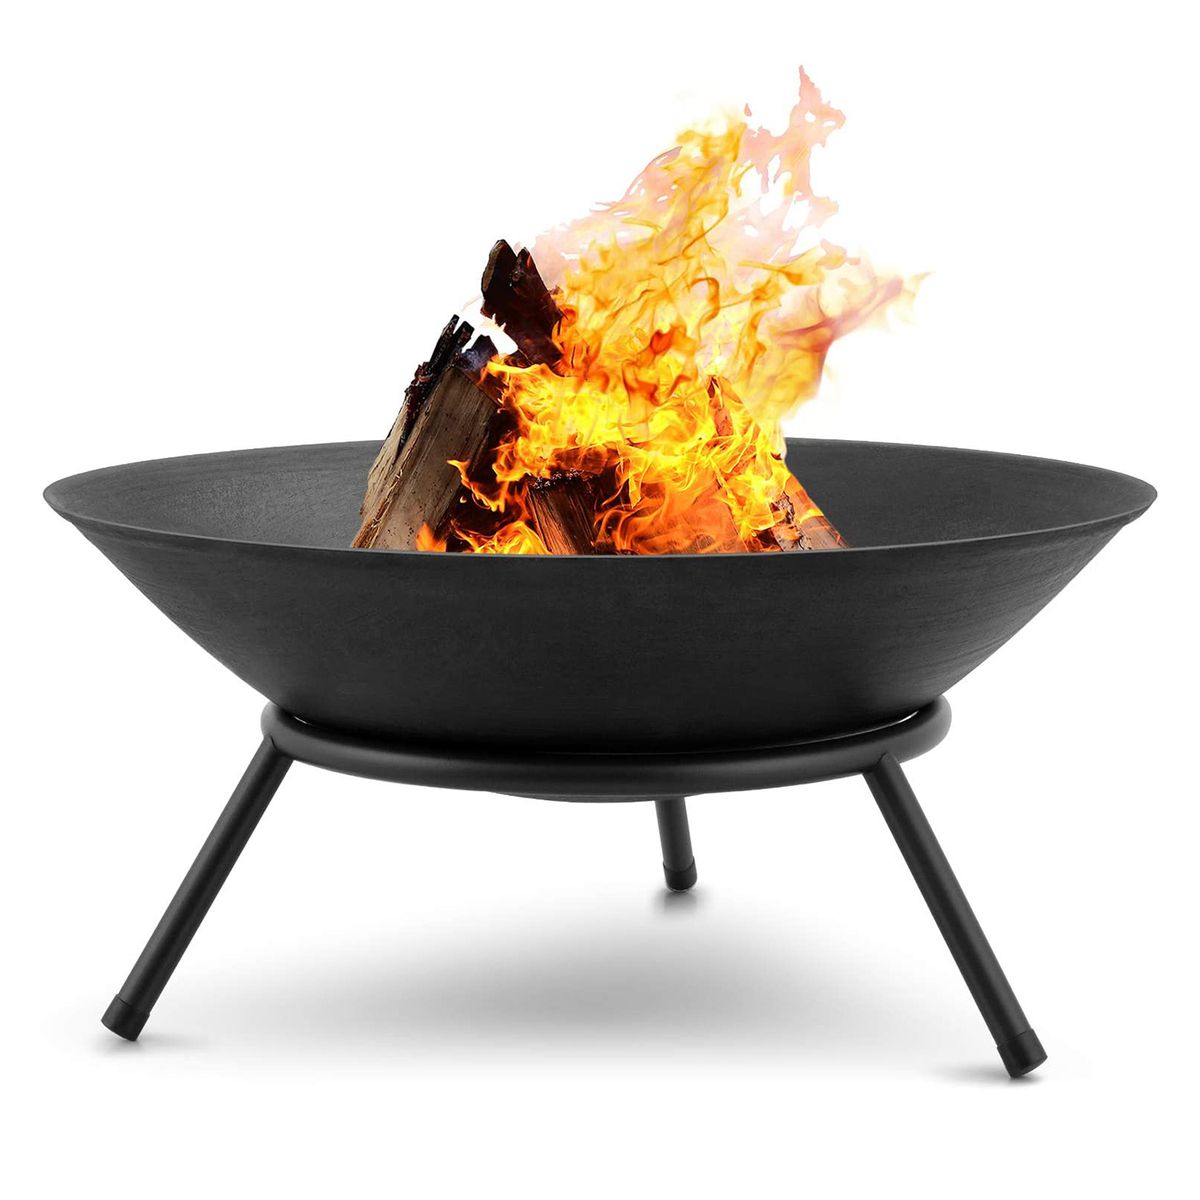 Cast Iron Skull Fire Pit Small by The Indian Fire Pit Company 